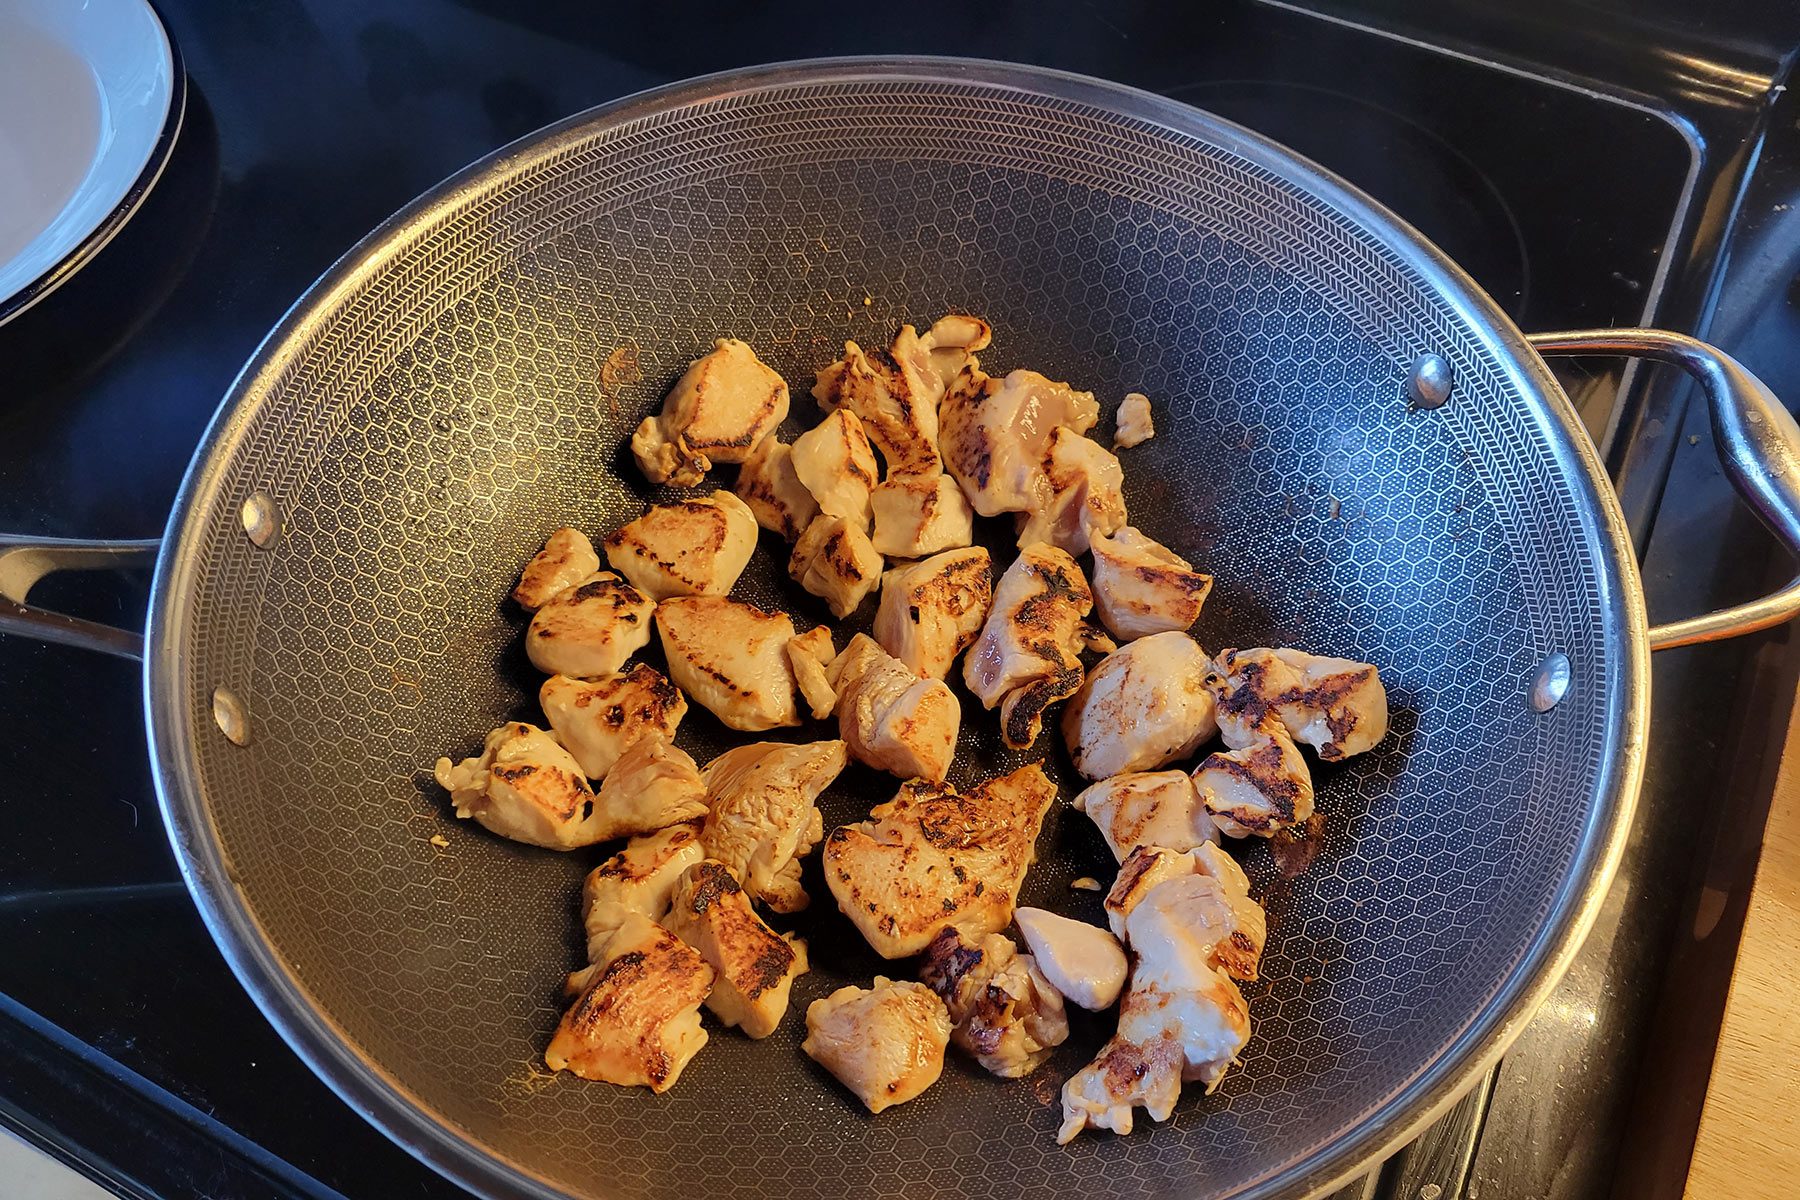 Review: I Tested the HexClad Wok That's Compatible With All